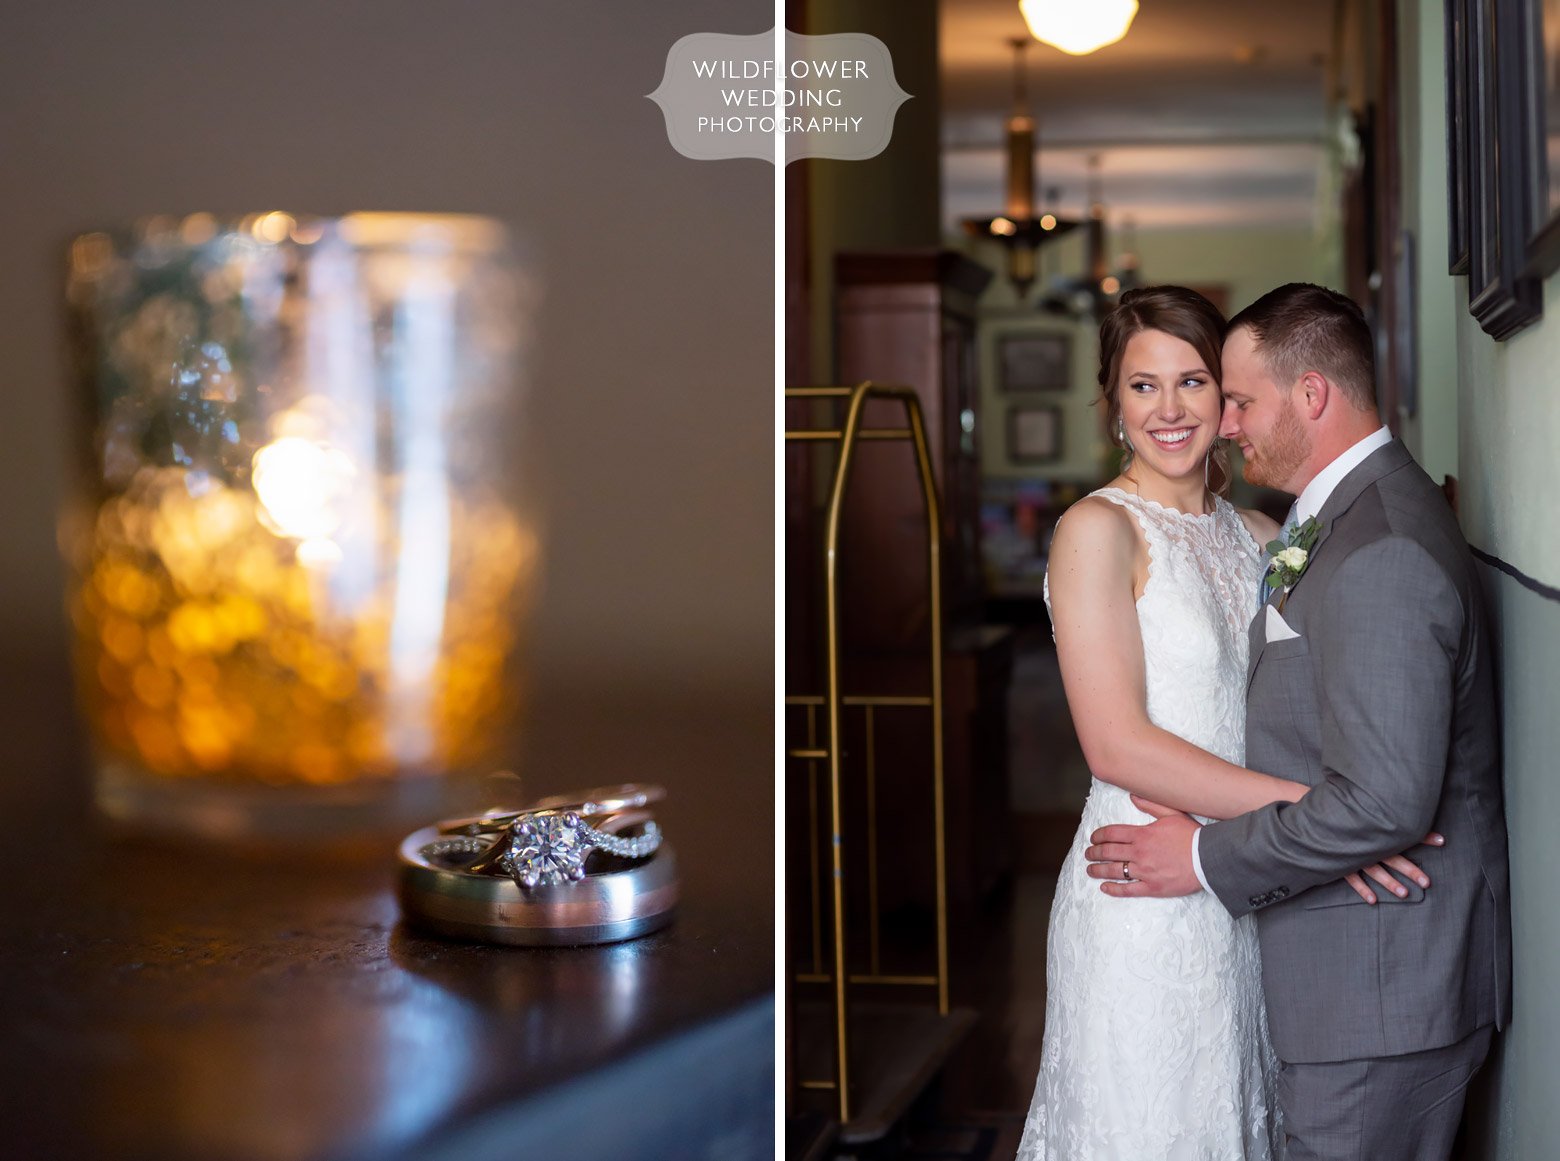 Romantic wedding photo of bride and groom in historic hotel.